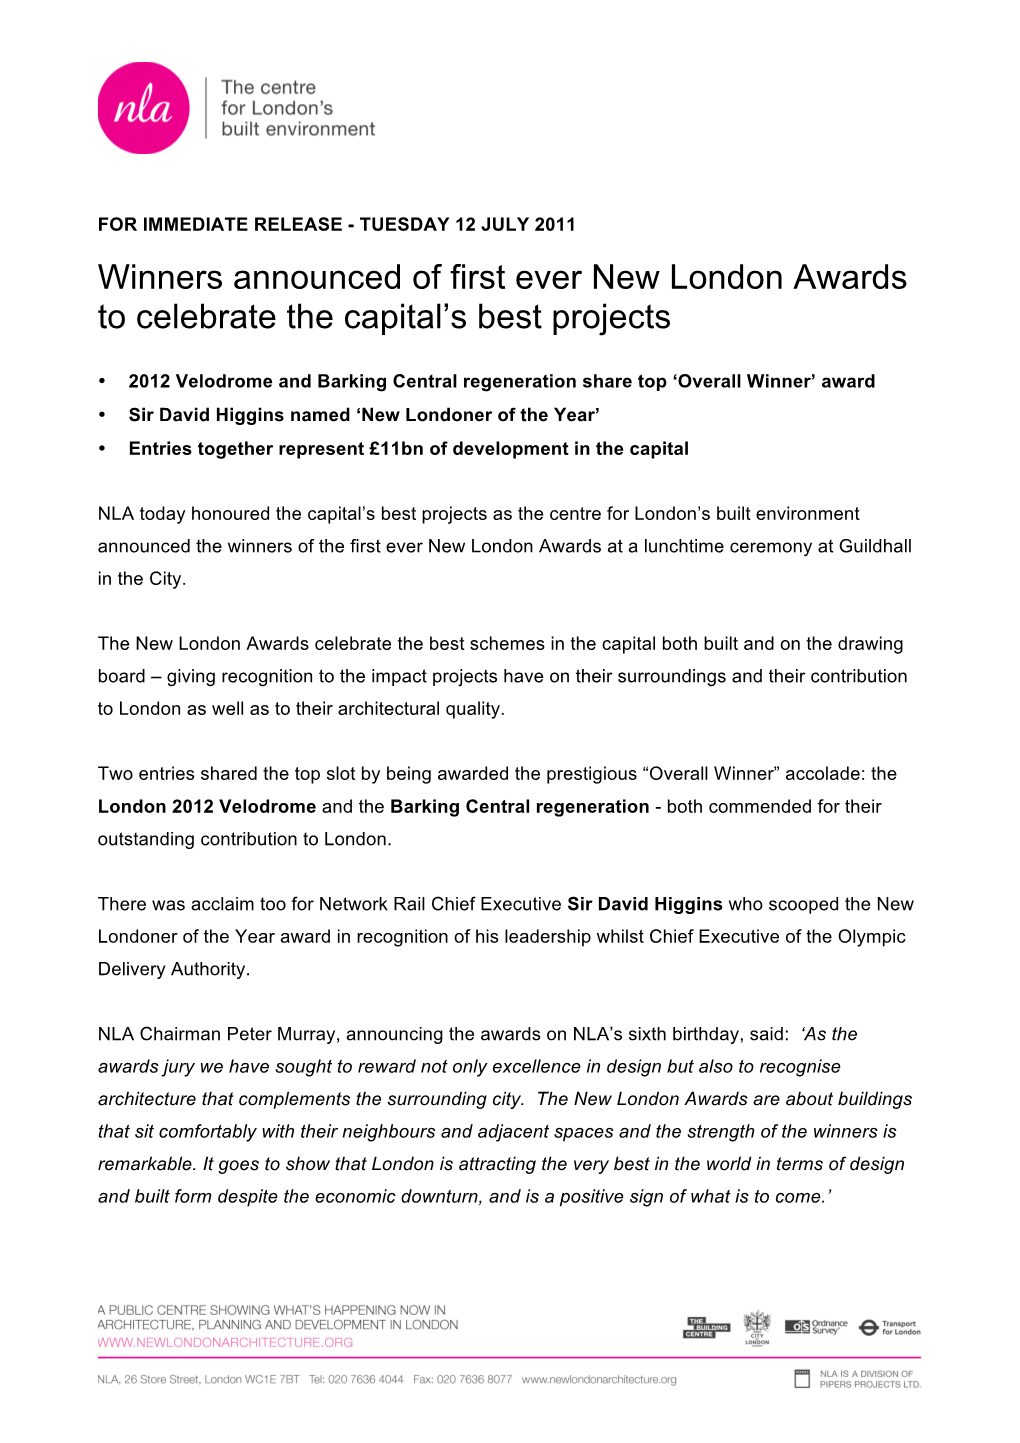 Winners Announced of First Ever New London Awards to Celebrate the Capital’S Best Projects